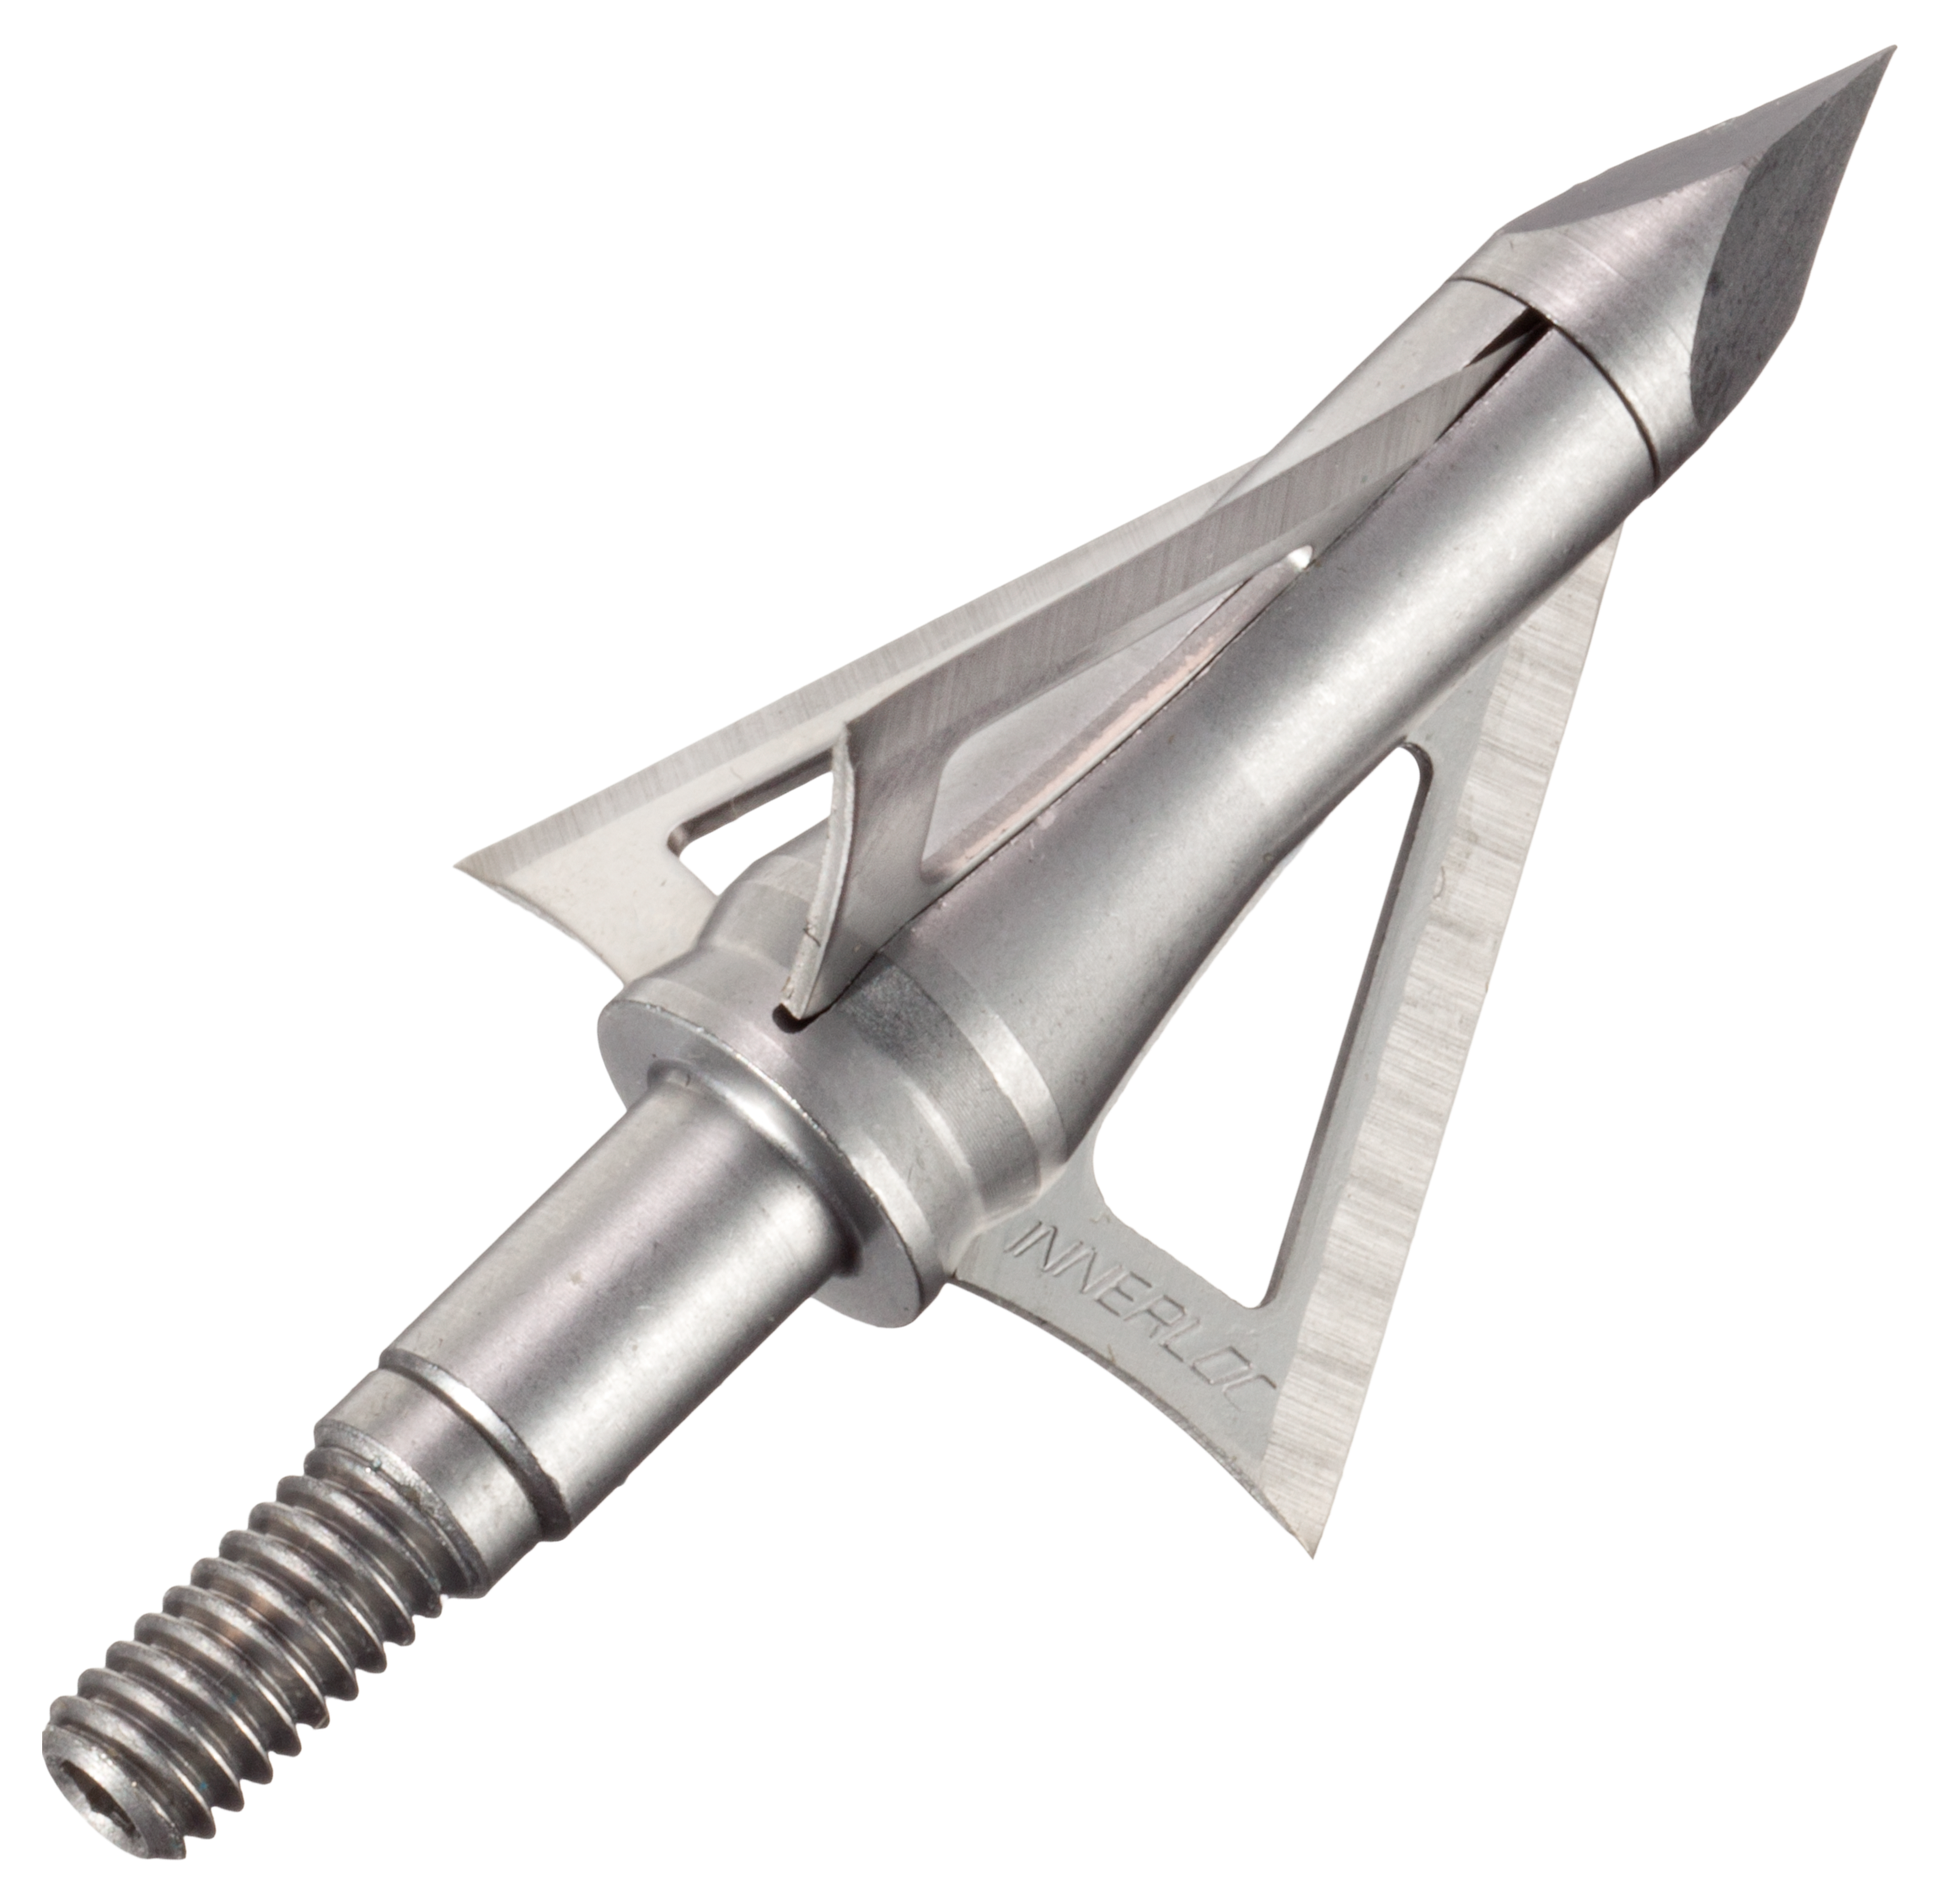 Excalibur Boltcutter B.A.T. Crossbow Broadheads